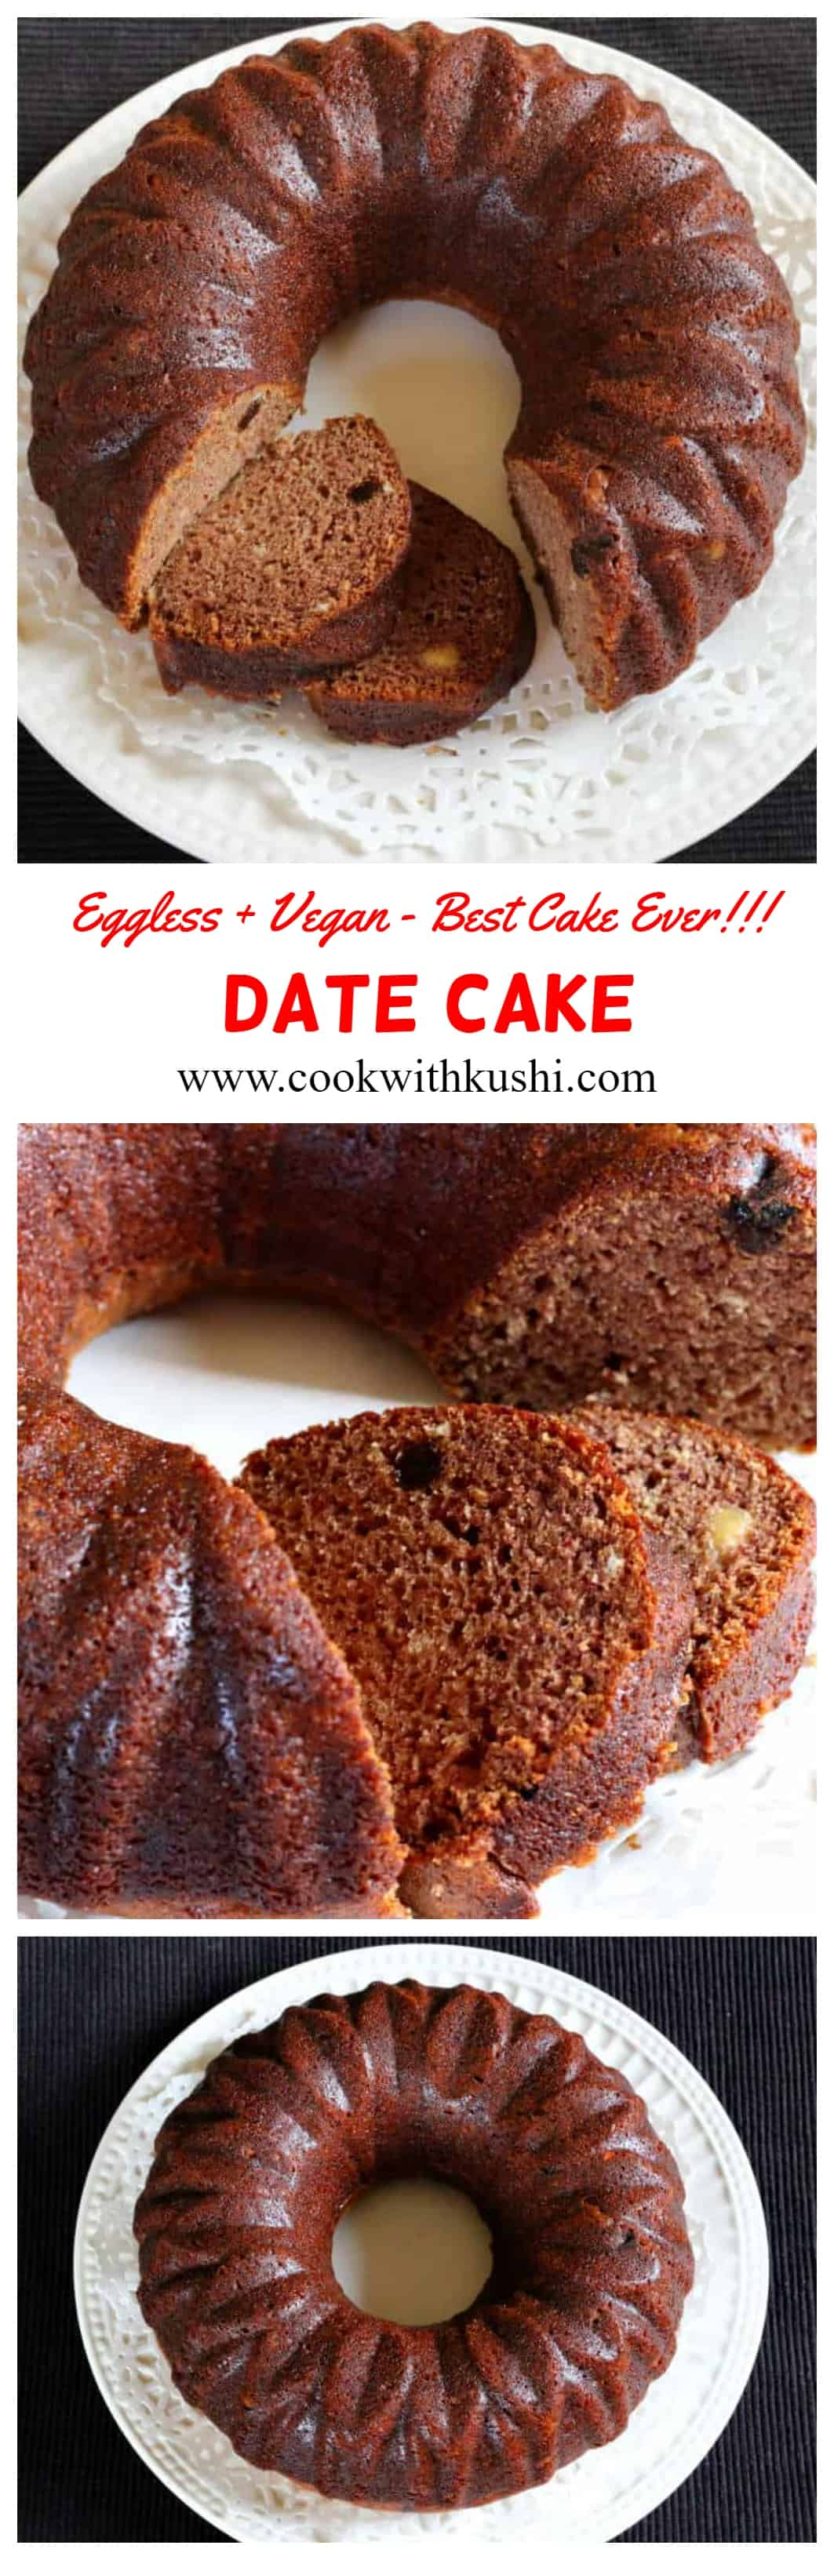 Eggless Dates Cake is a super delicious, soft and moist cake that is a perfect accompaniment for your tea or coffee. #coffeecake #datecake #dateloaf #datescake #egglesscake #vegancake #christmascake